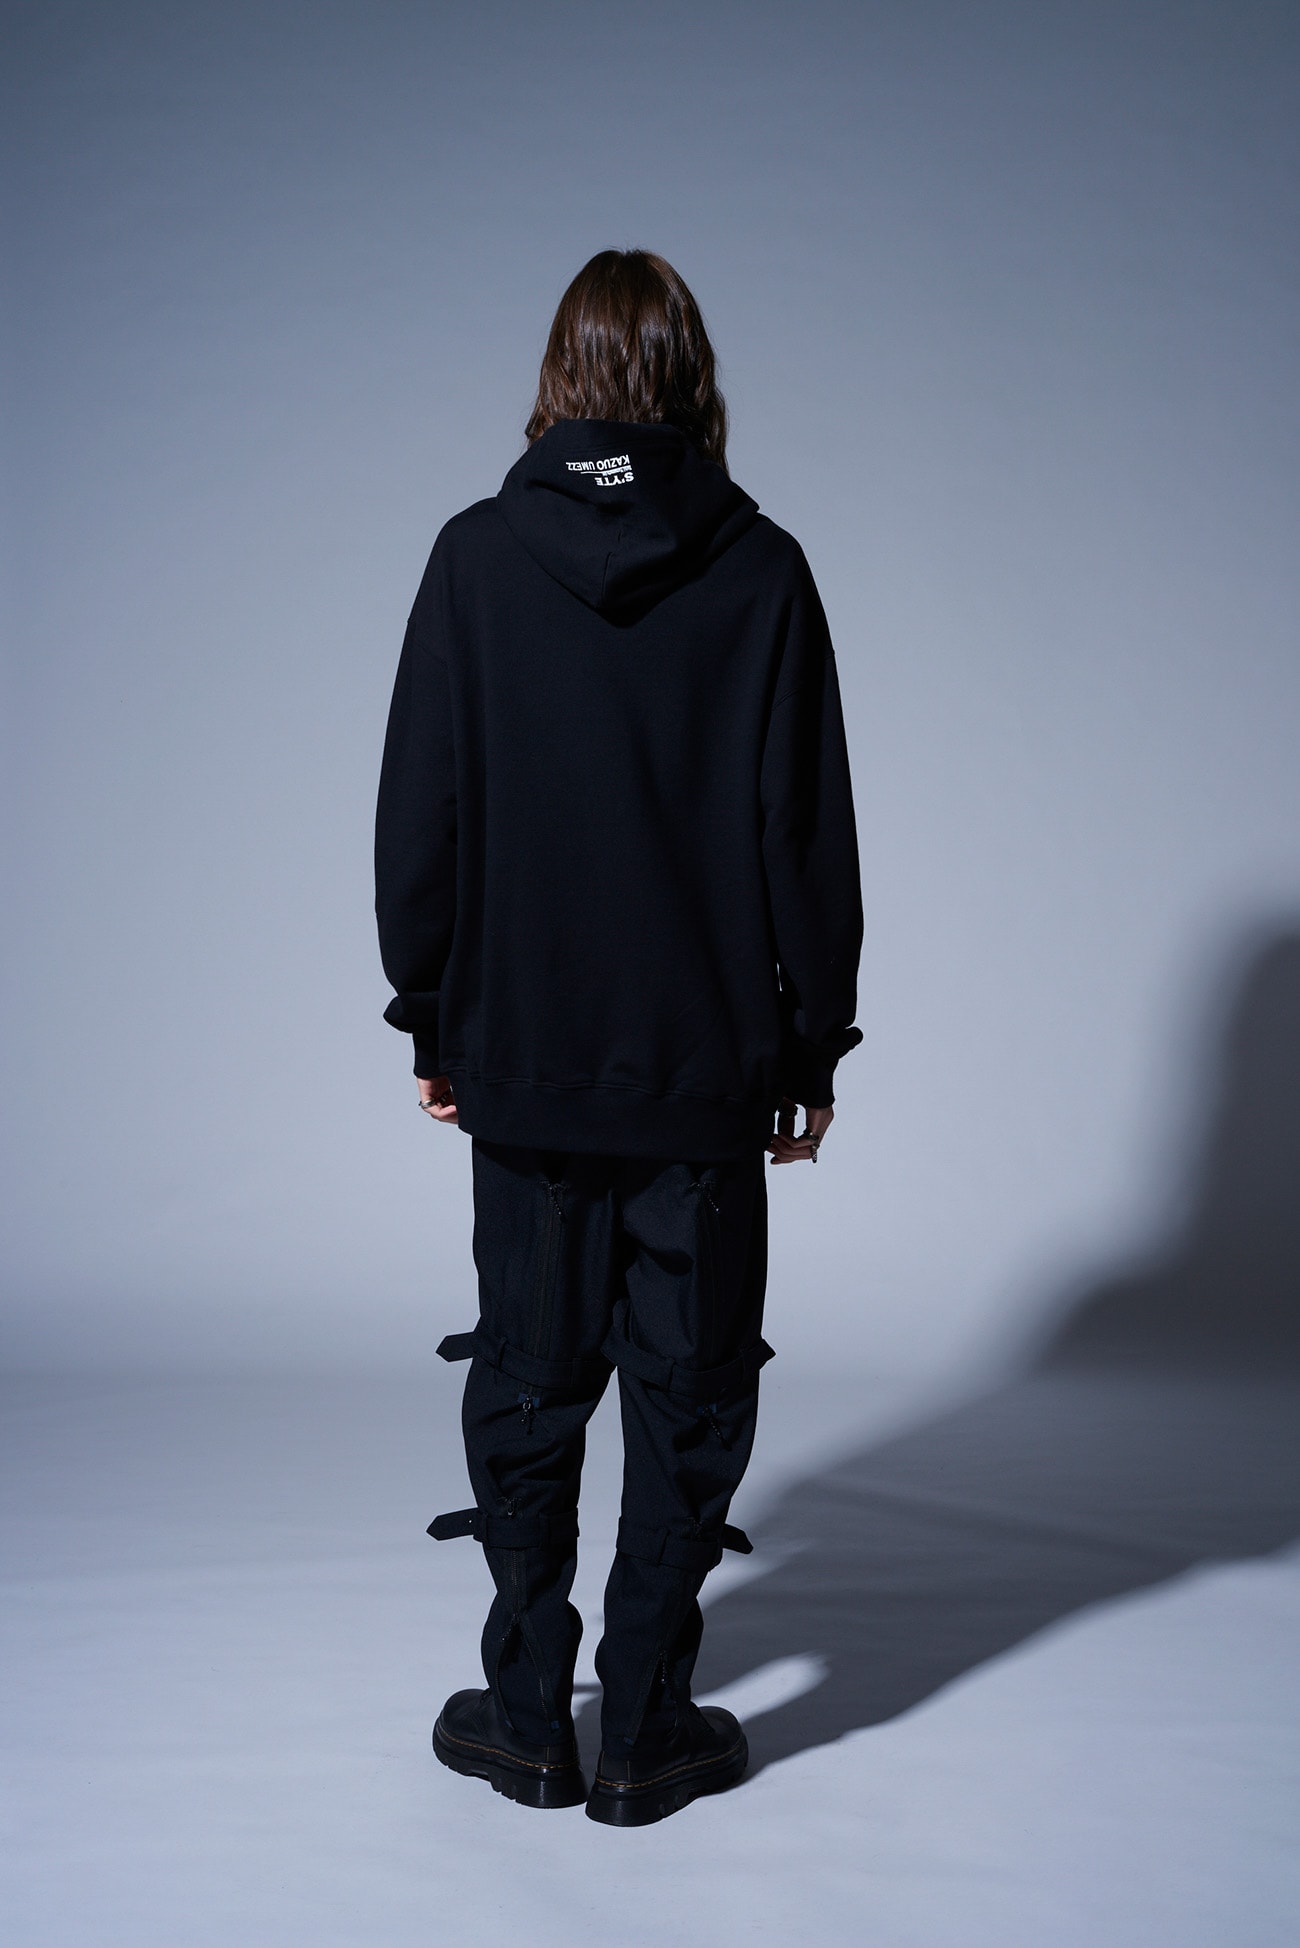 S'YTExKAZUO UMEZZ-MY NAME IS SHINGO- FRENCH TERRY HOODIE WITH PRINTED ILLUSTRATIONS“Marin”